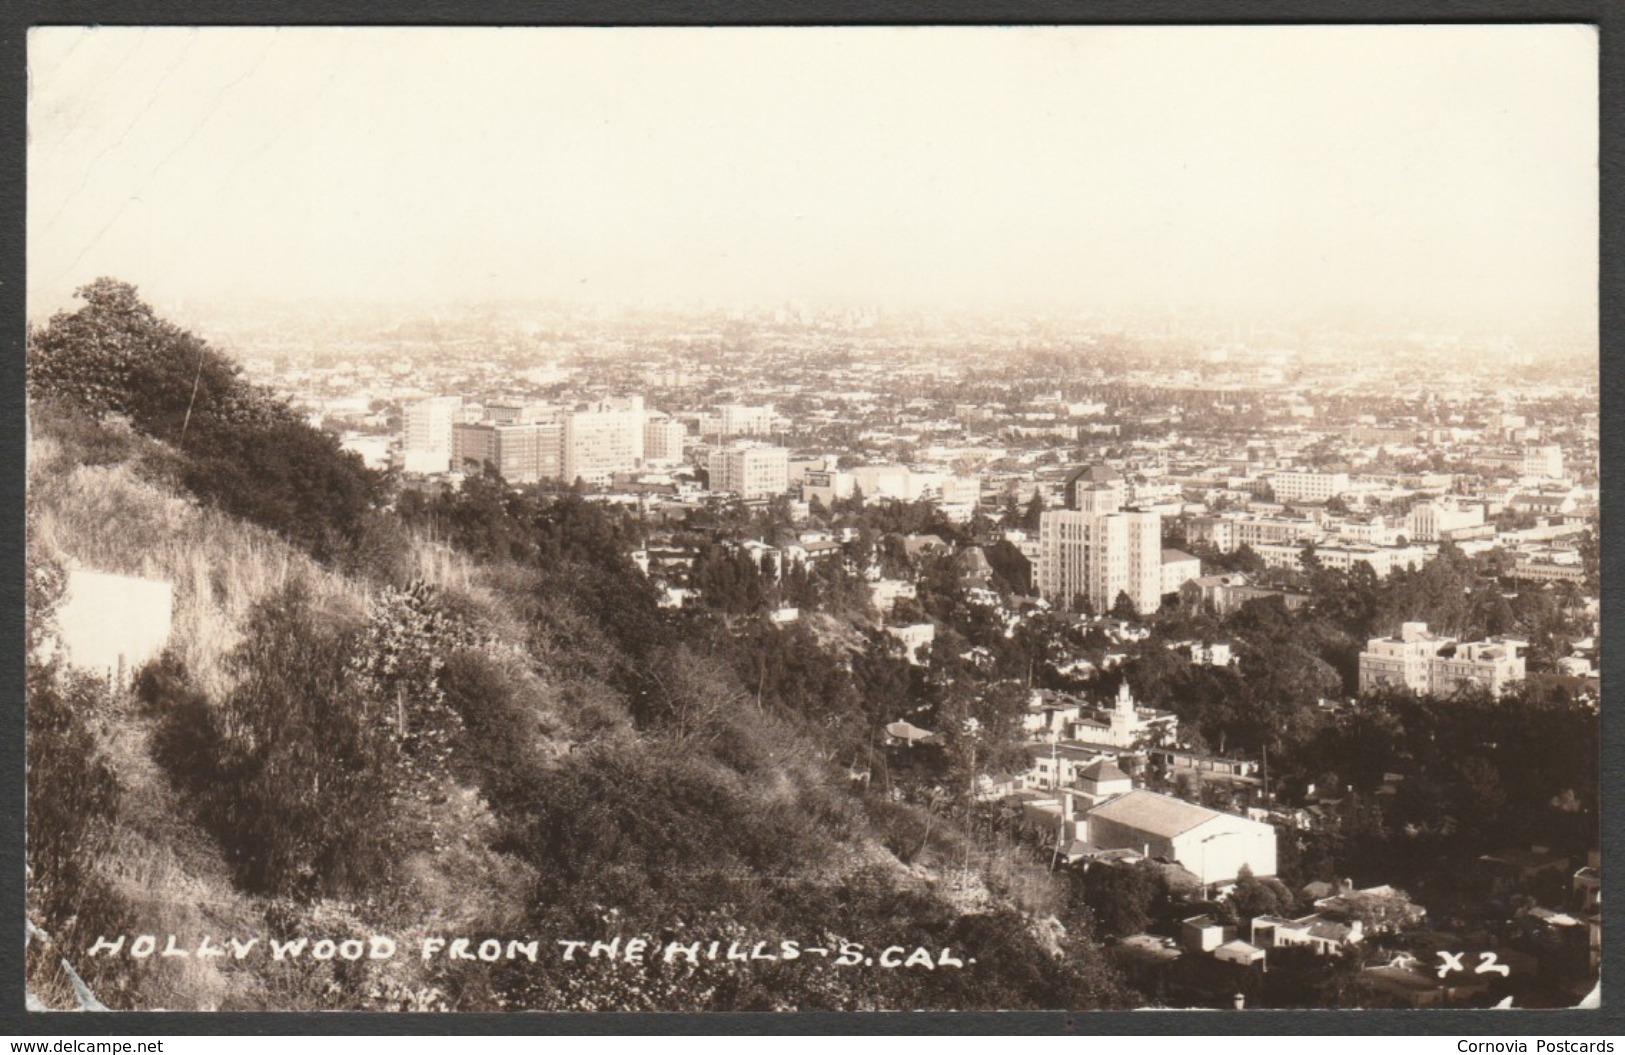 Hollywood From The Hills, Los Angeles, California, 1935 - RPPC - Los Angeles